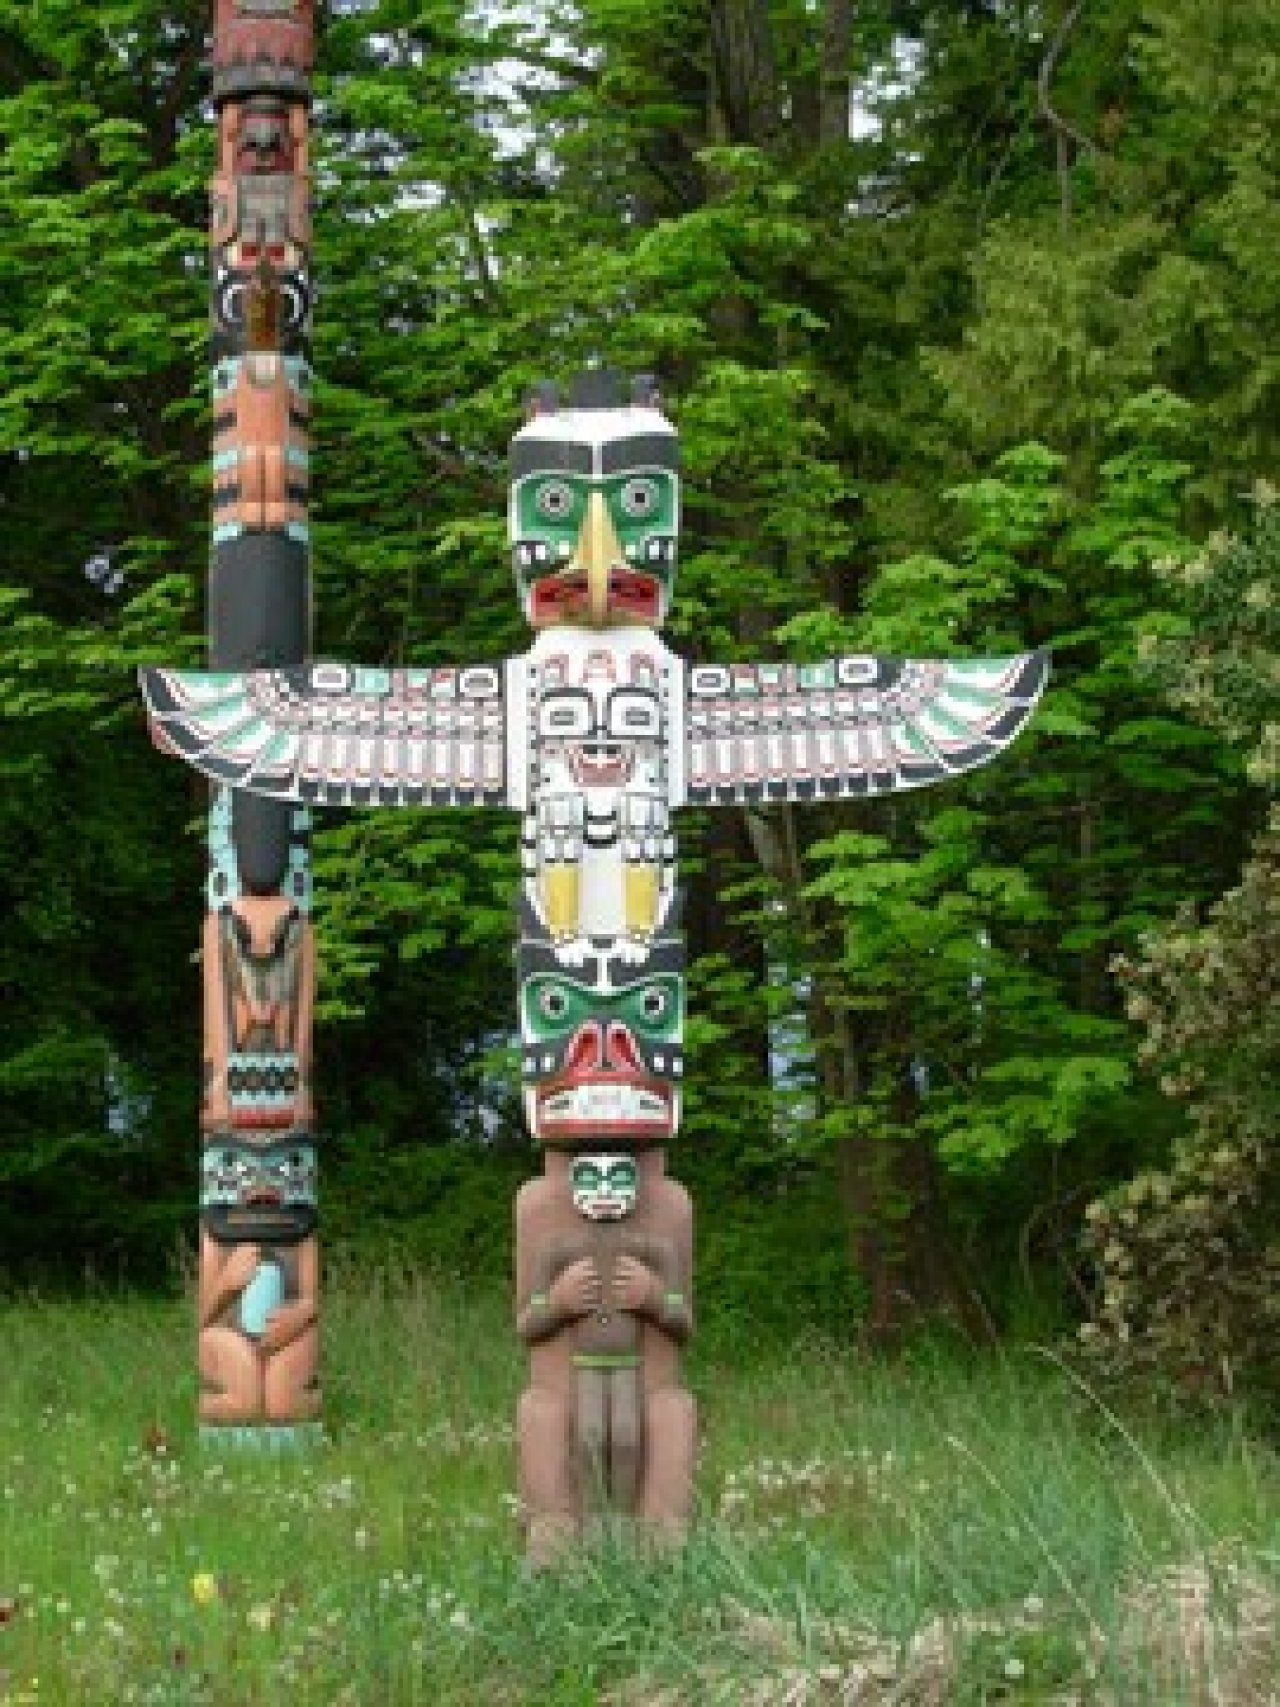 Thunderbird House Post Totem Pole. Source: http://stanleyparkvan.com/stanley-park-van-attractions-totem-poles.html